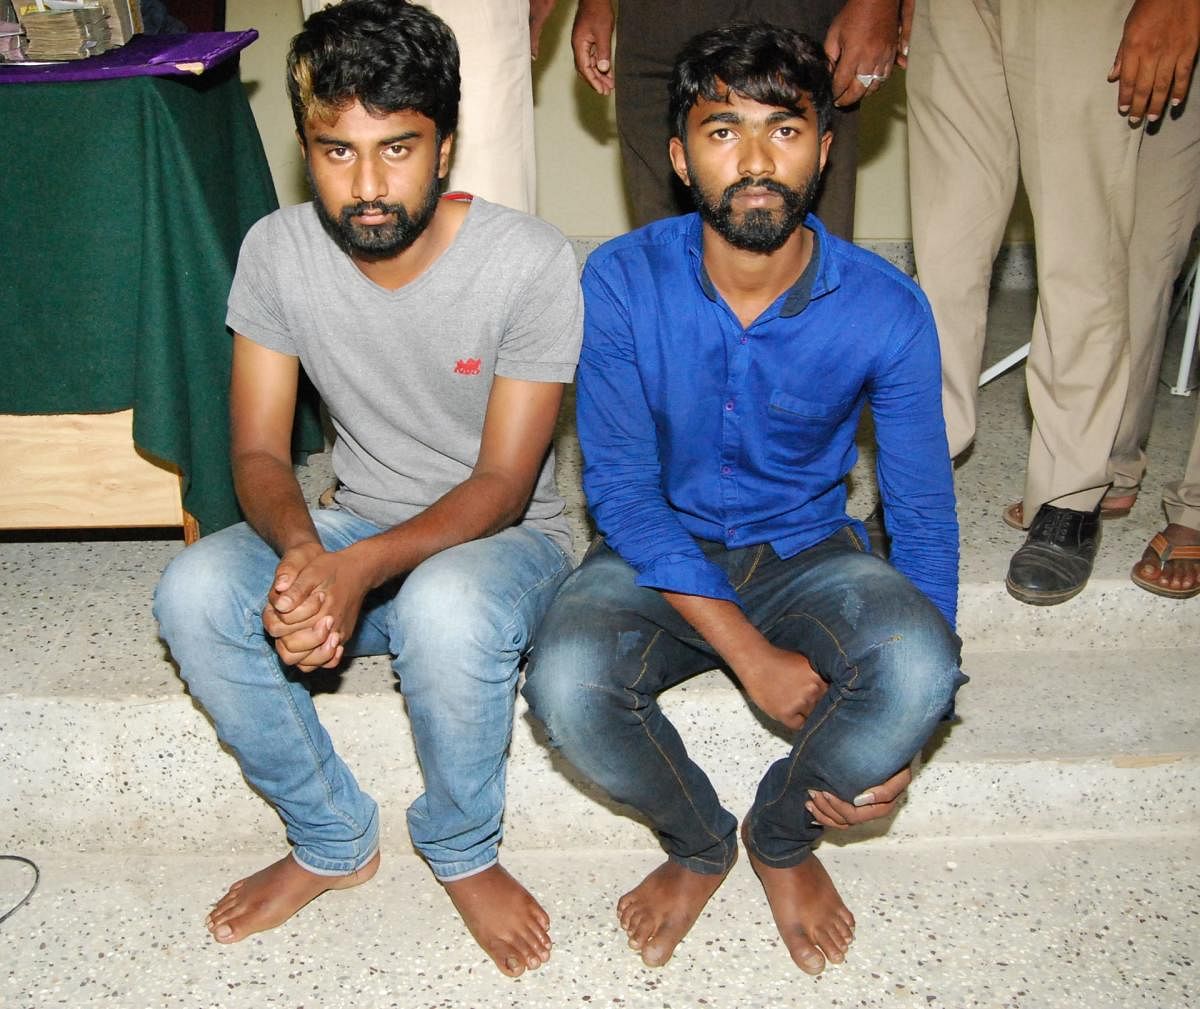 Sagar's involvement was revealed after Malavalli Town Police arrested V Nitin and B Rakesh, while they were quarreling over the issue of sharing the stolen money in a drunken state in Malavalli in Mandya district on Tuesday.